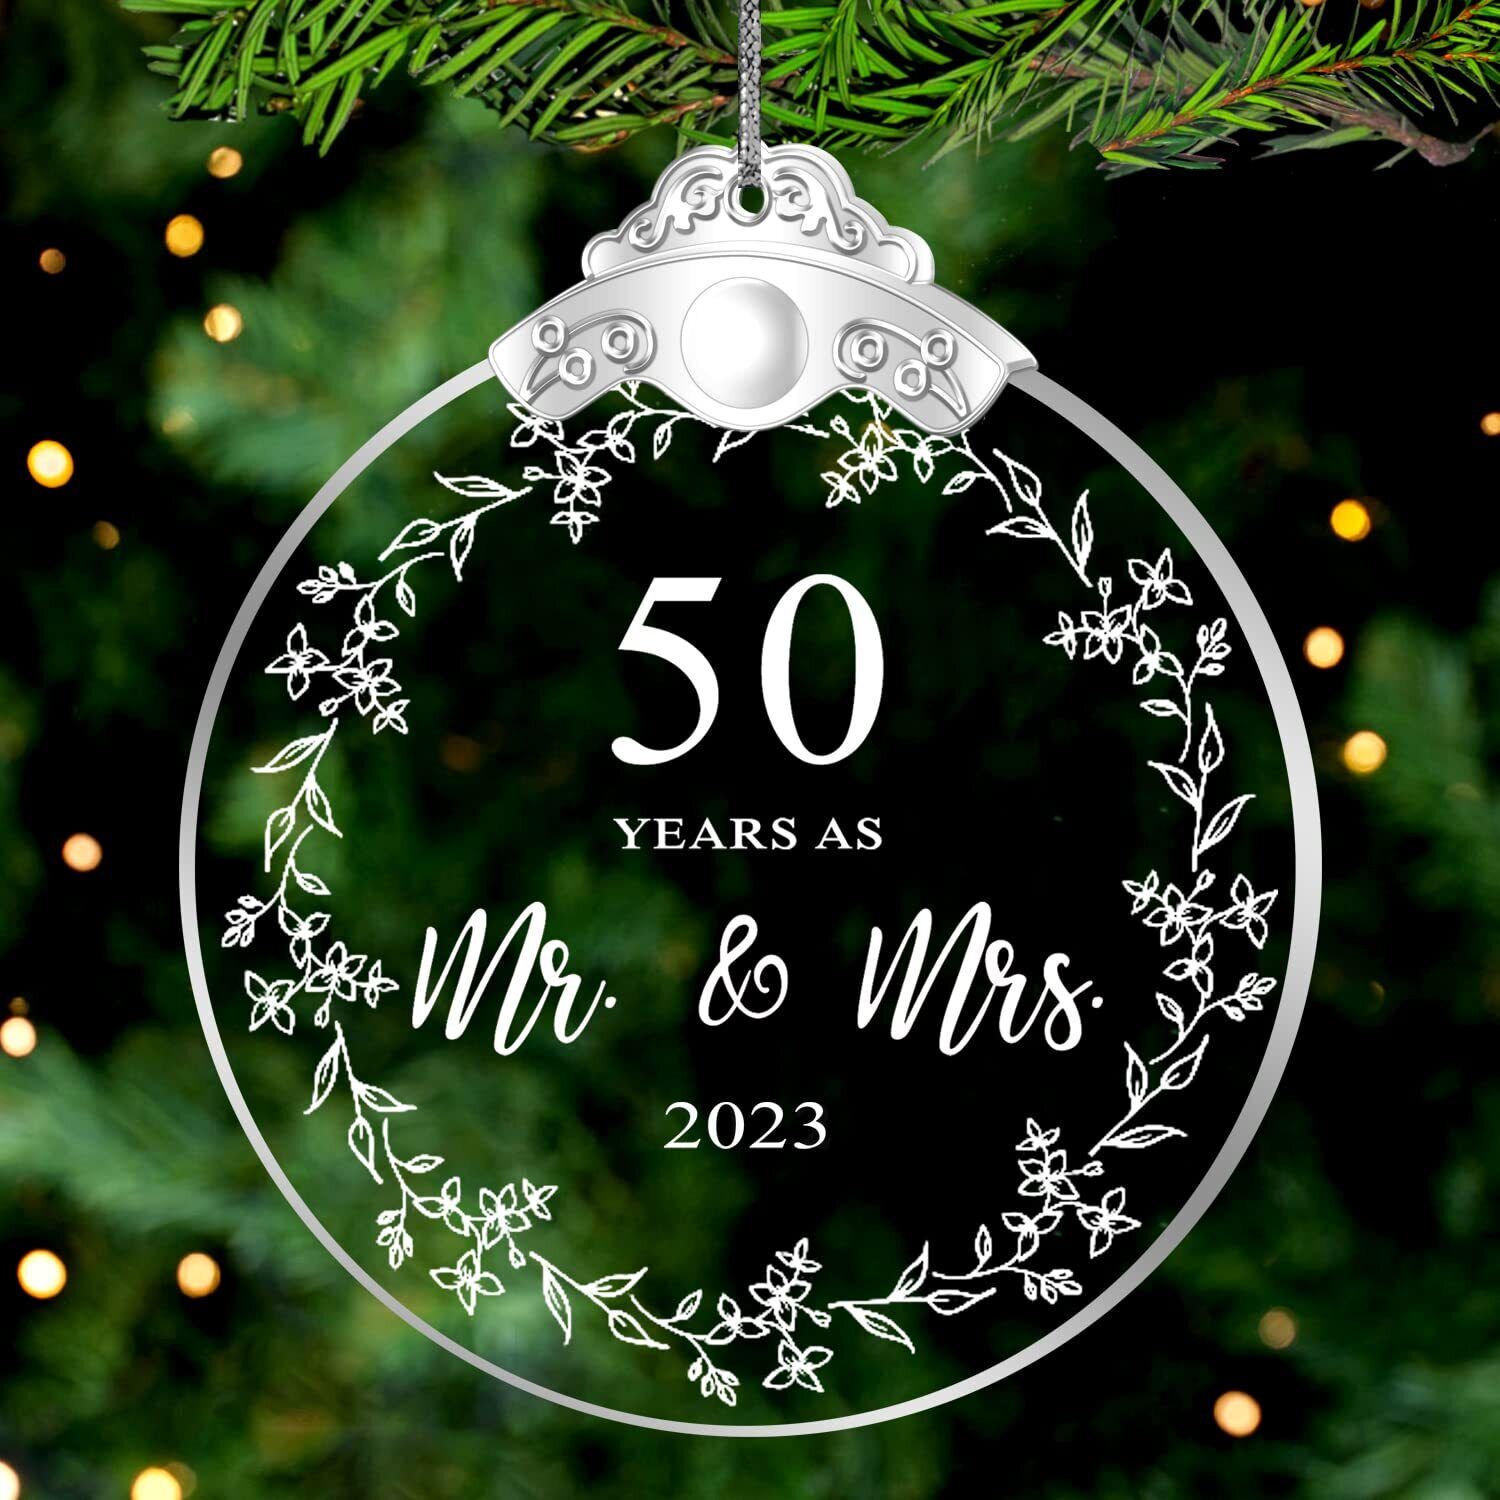 50 Years As Mr. & Mrs Christmas Glass Ornament 2023, 50th 50 Years Anniversary P